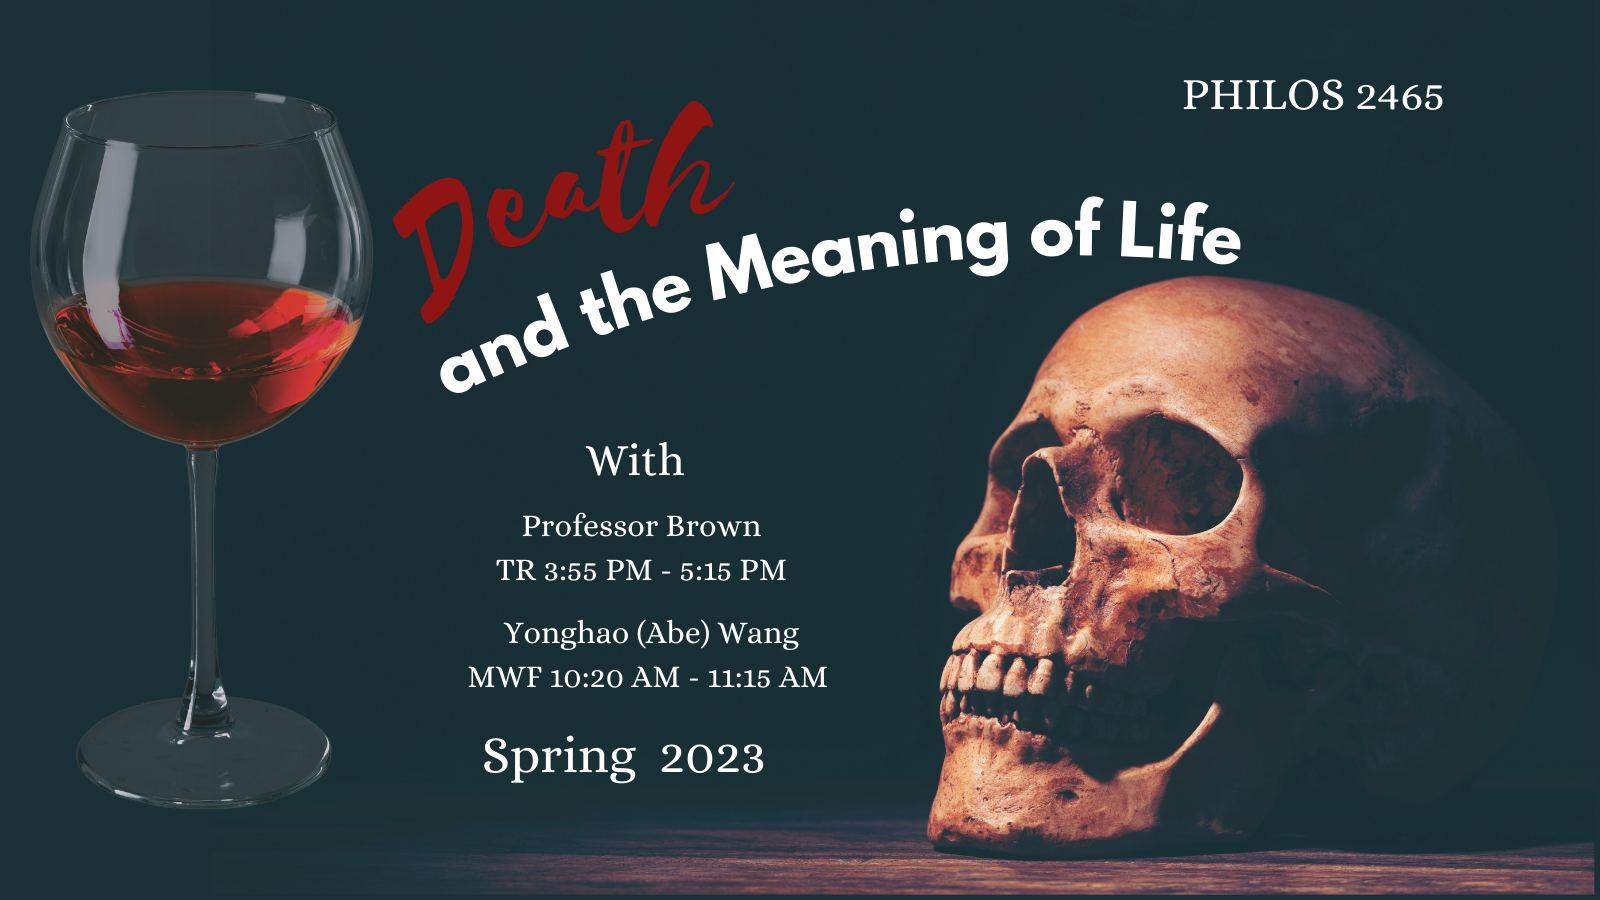 2465 Death and the meaning of life